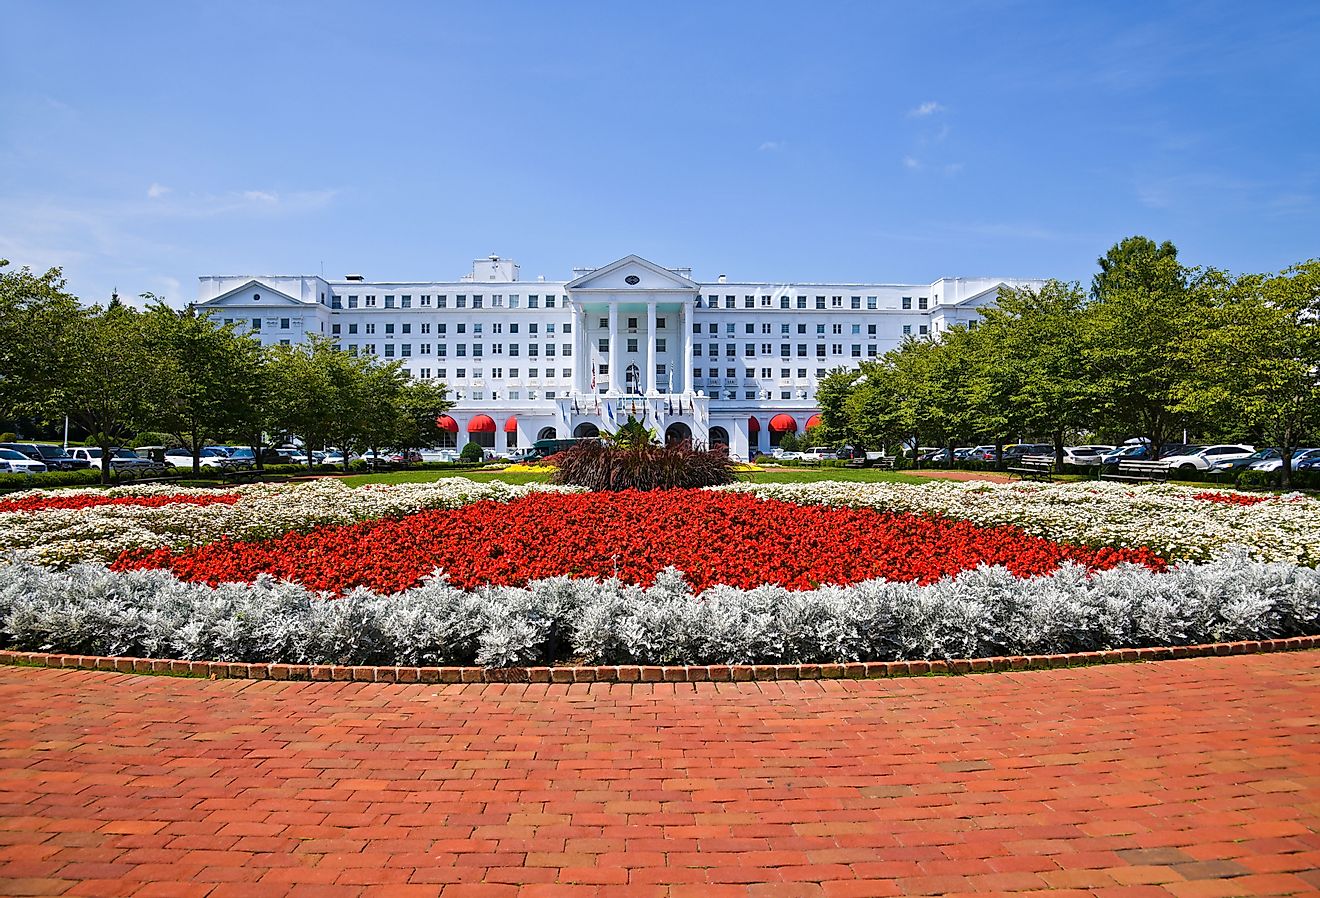 The Greenbrier is a luxury resort located in the Allegheny Mountains near White Sulphur Springs in Greenbrier County, West Virginia. Image credit Mark Winfrey via Shutterstock.